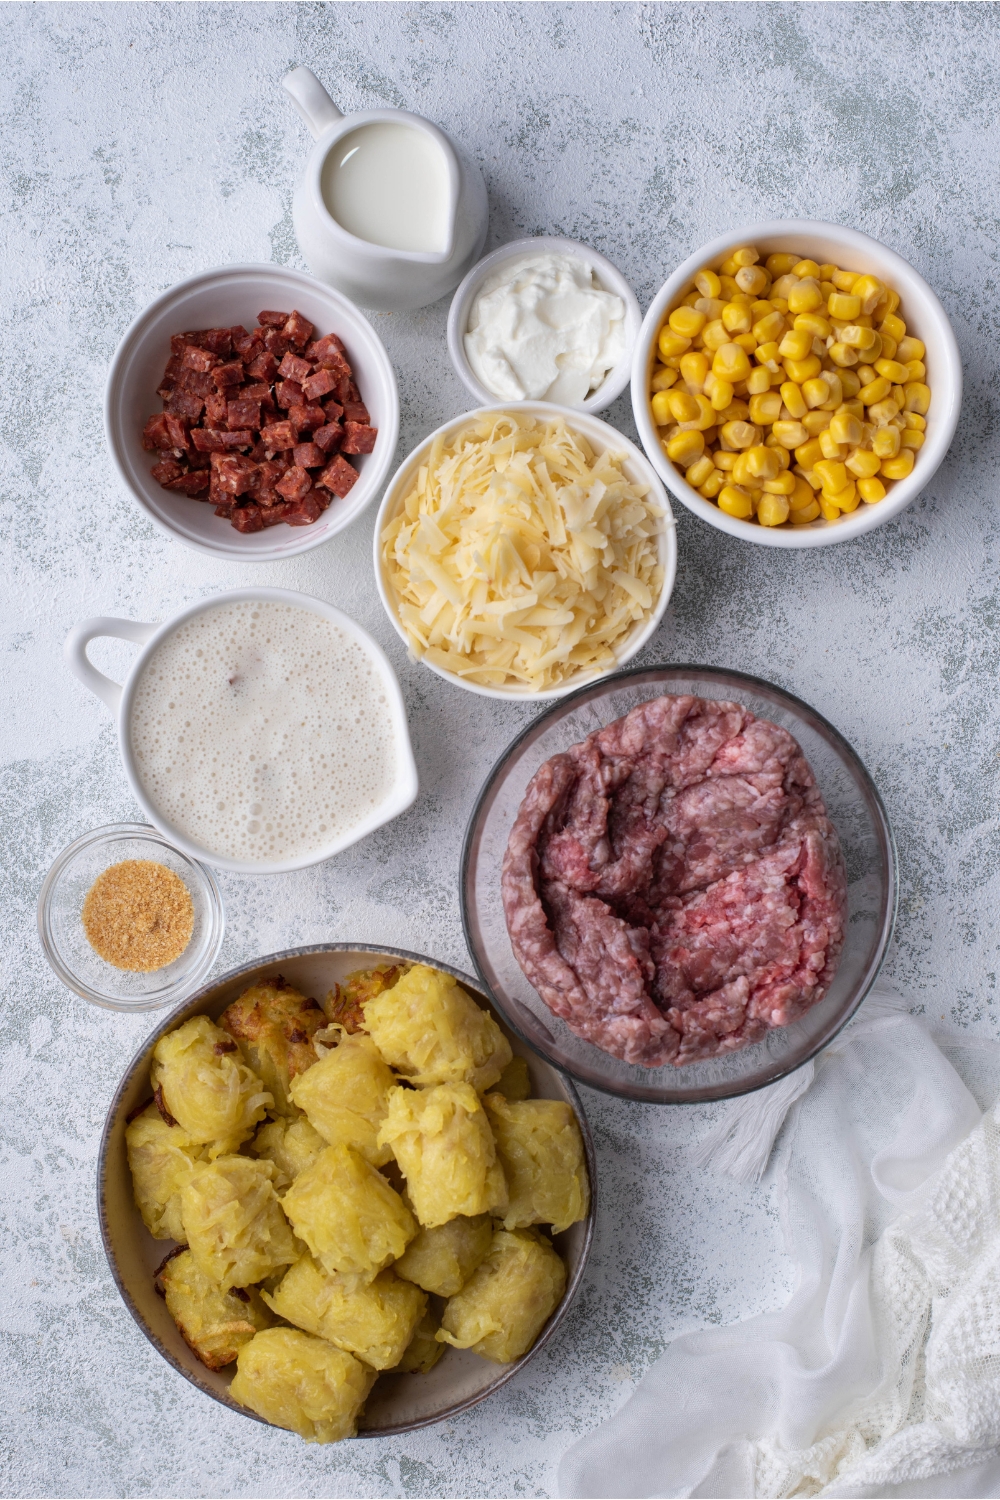 An assortment of ingredients including bowls of raw ground beef, corn, tater tots, chorizo, shredded cheese, sour cream, and spices.